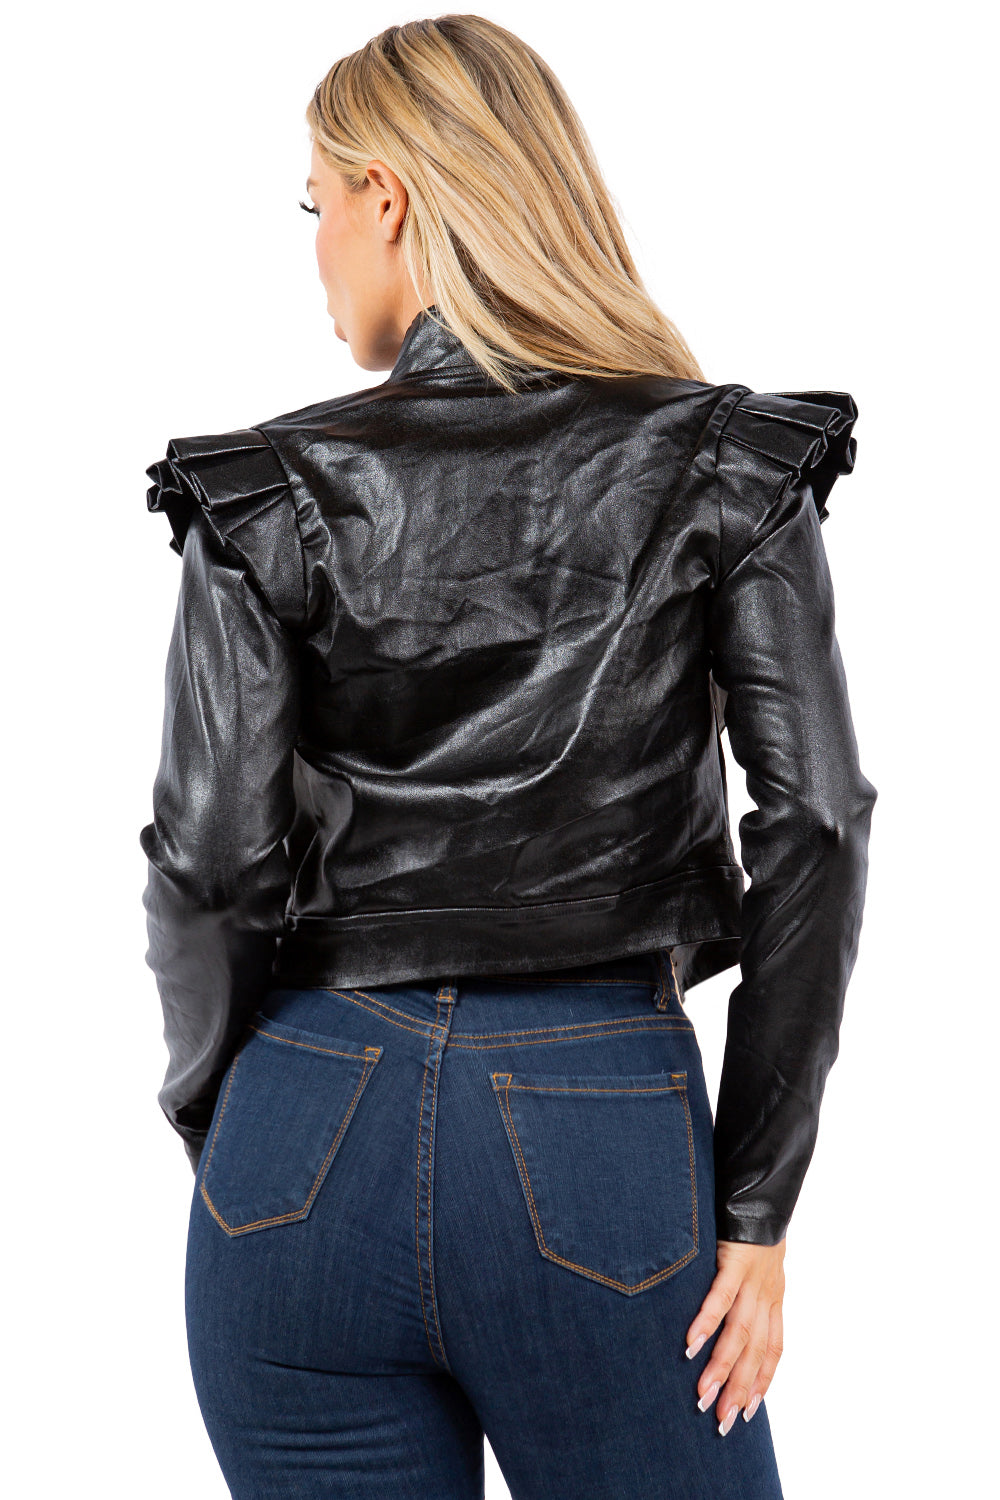 Women's Metallic Cropped Jacket with Ruffle Shoulder Detail and Long Sleeves